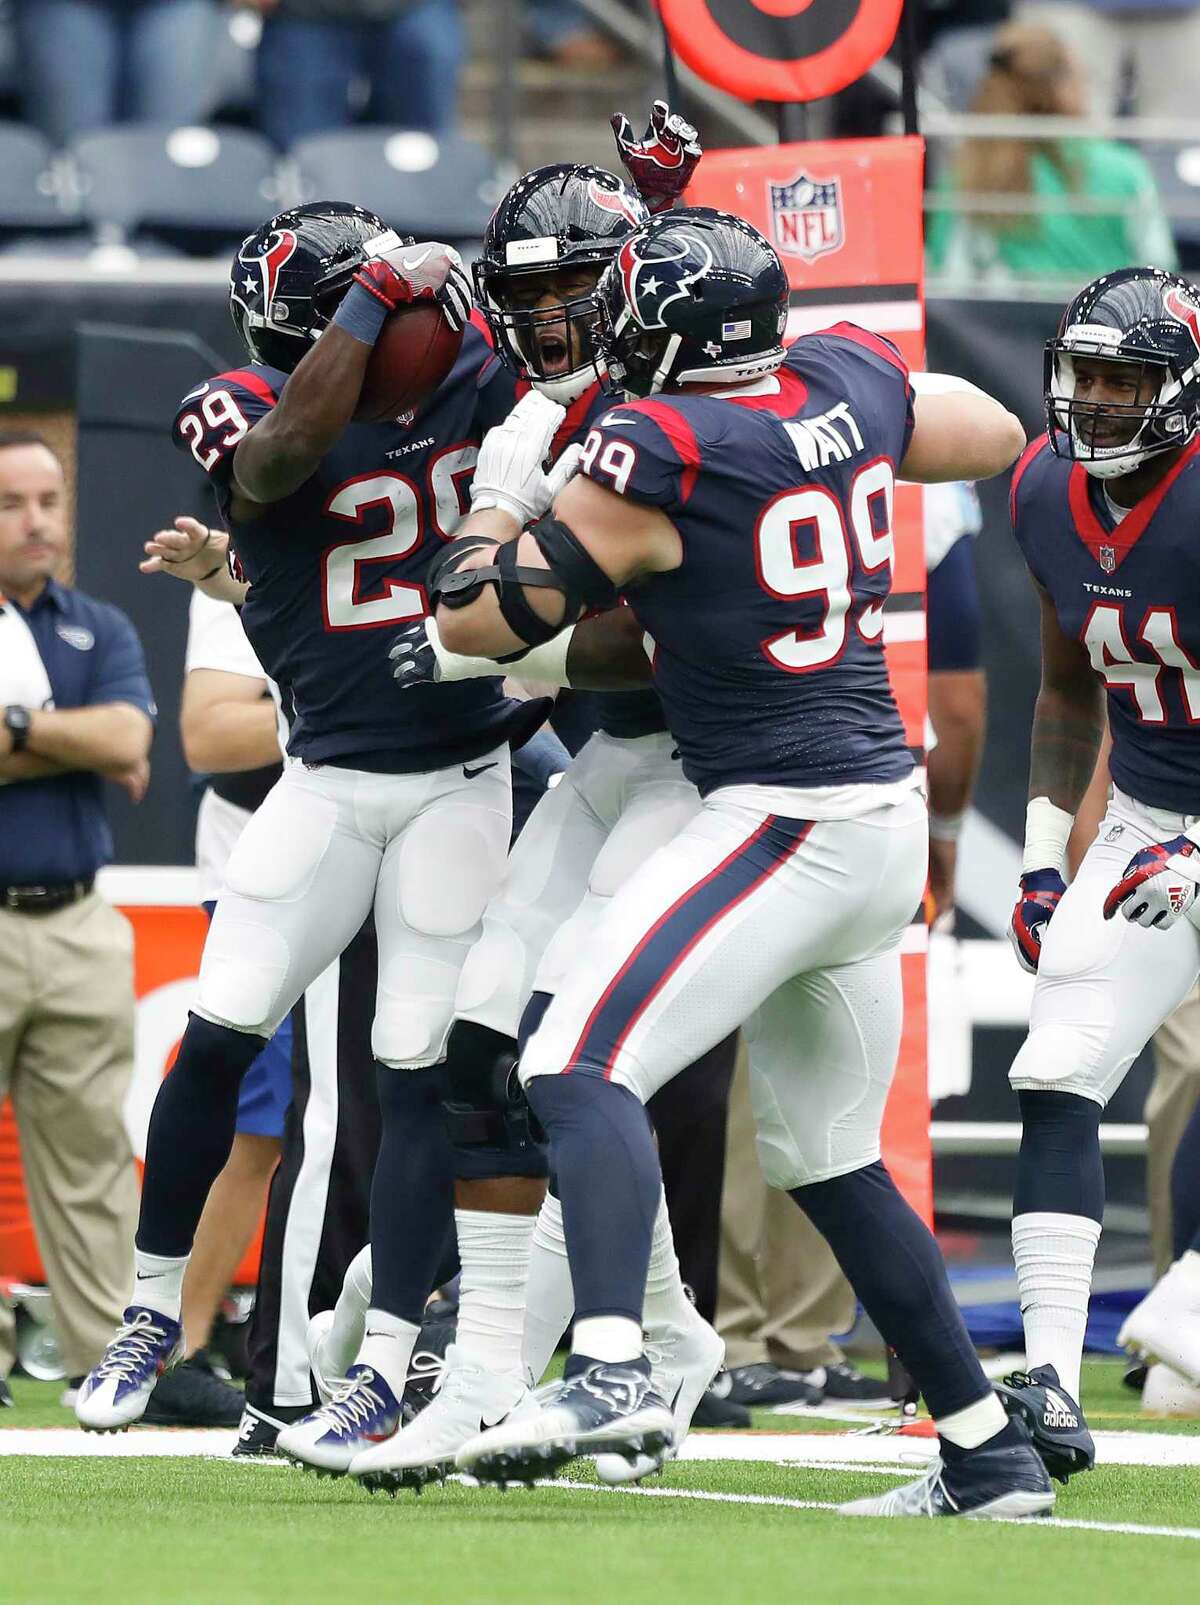 Houston Texans defensive end J.J. Watt (99) and Houston Texans free safety Andre Hal (29) celebrate an interception during the first quarter of an NFL football game at NRG Stadium, Sunday, Oct. 1, 2017, in Houston. ( Karen Warren / Houston Chronicle )